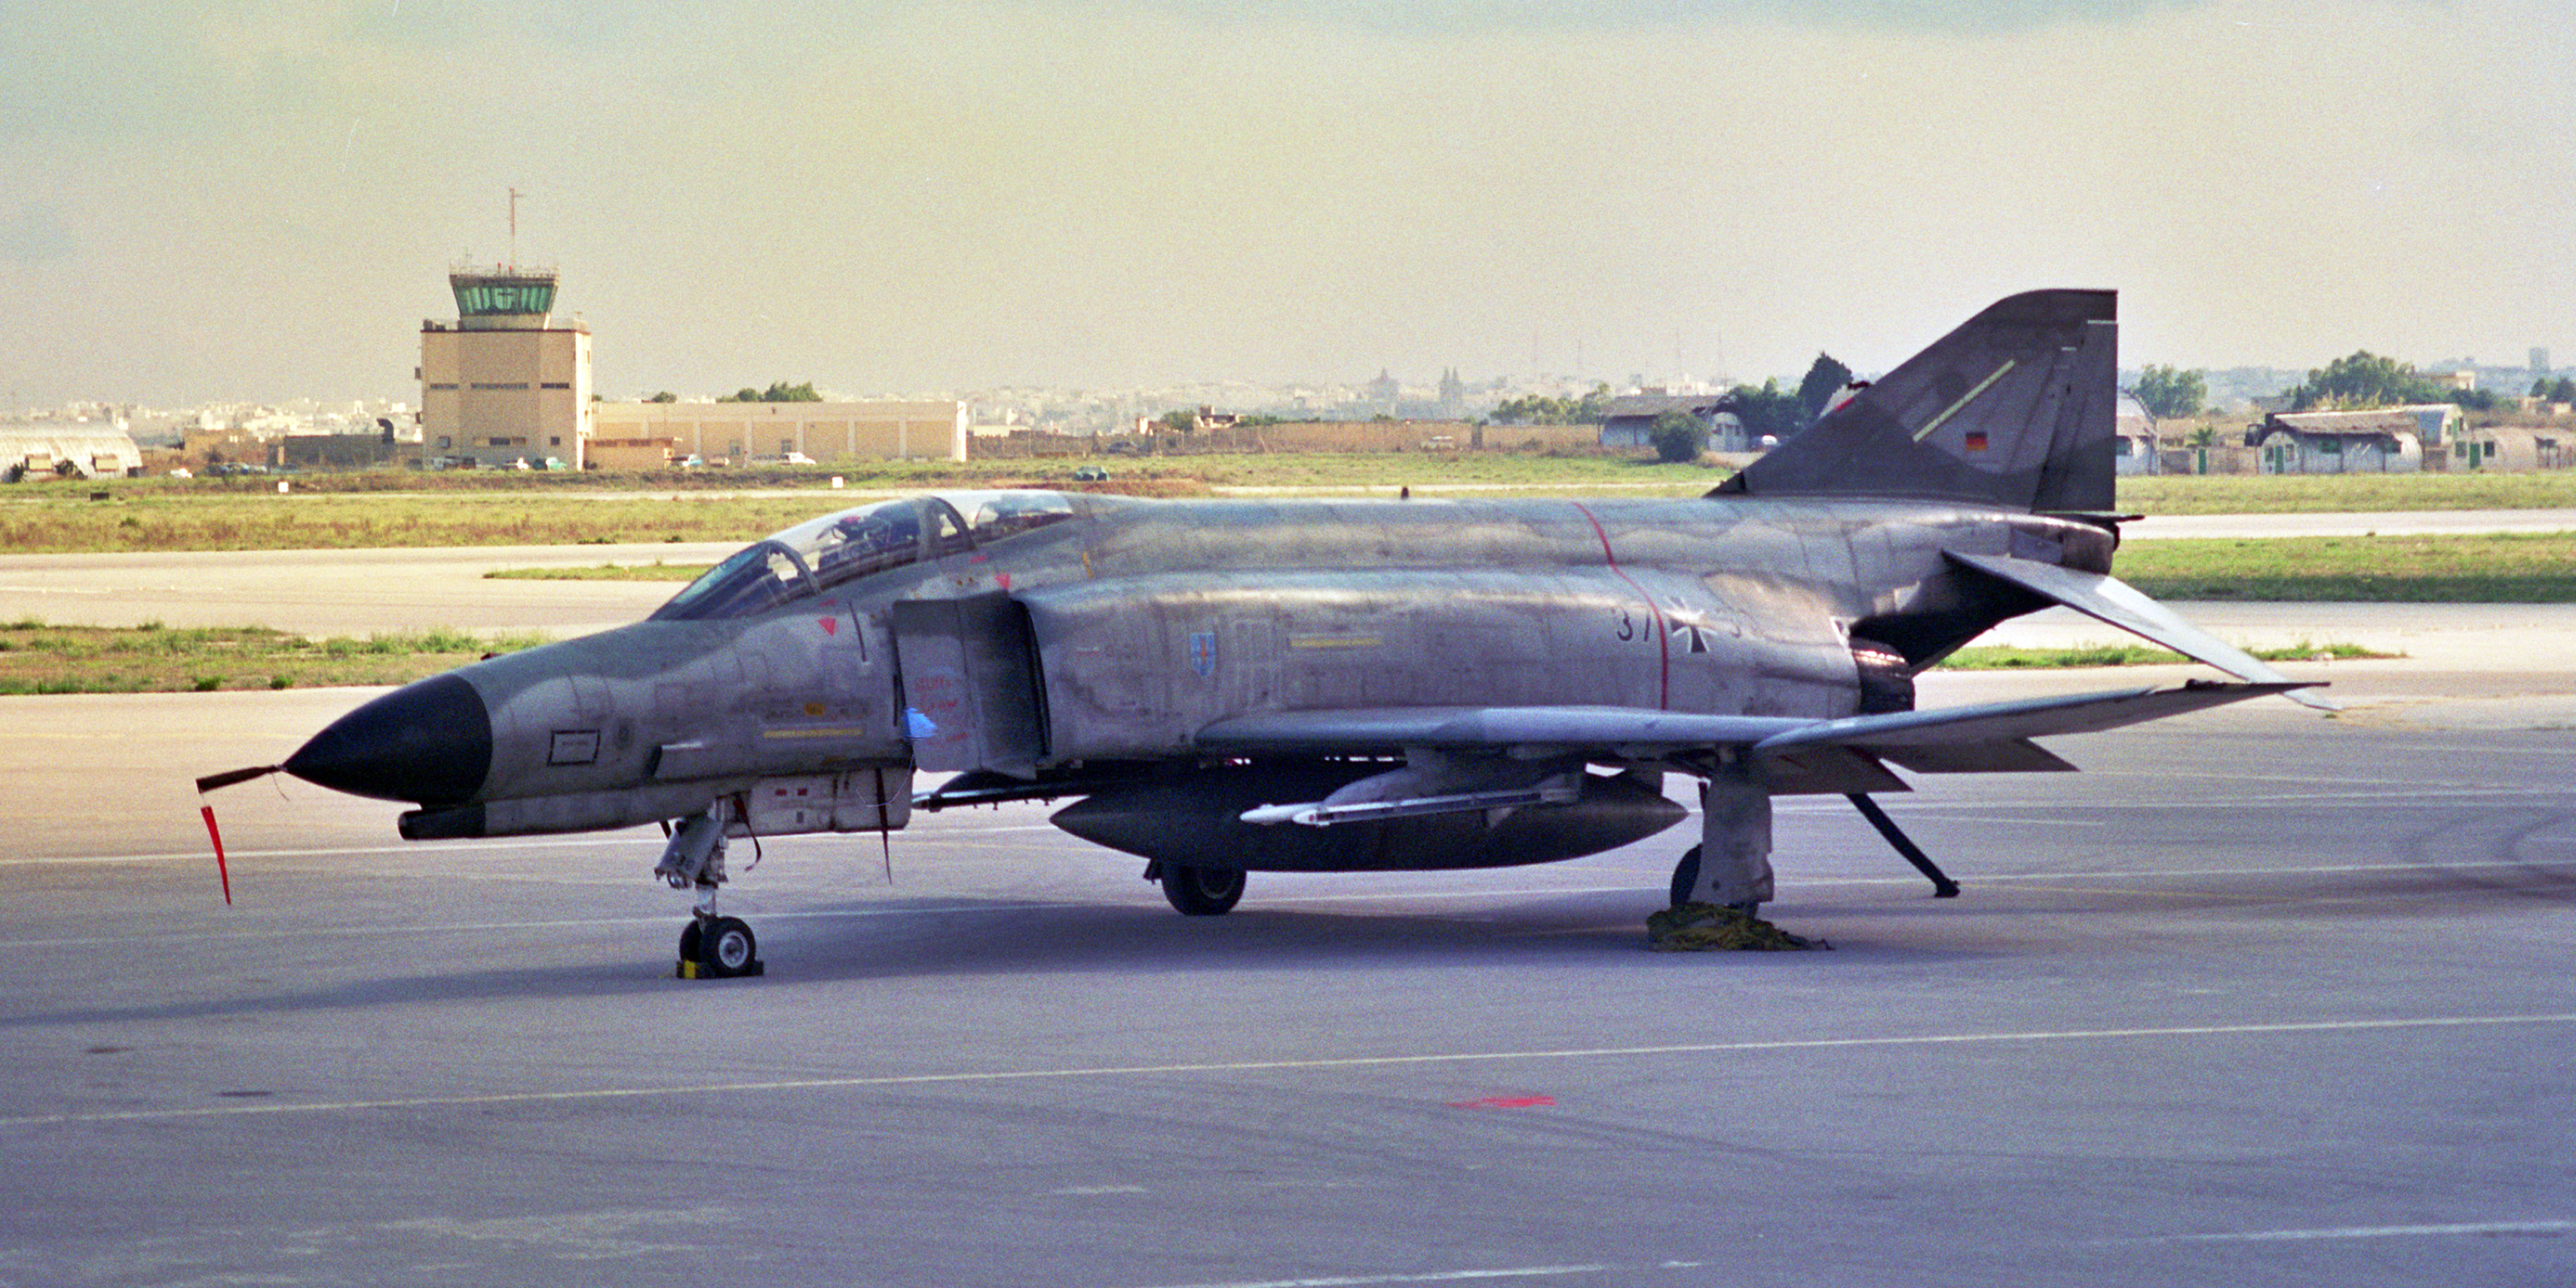 37+30 taking part in the static display at Malta International Airshow 1996